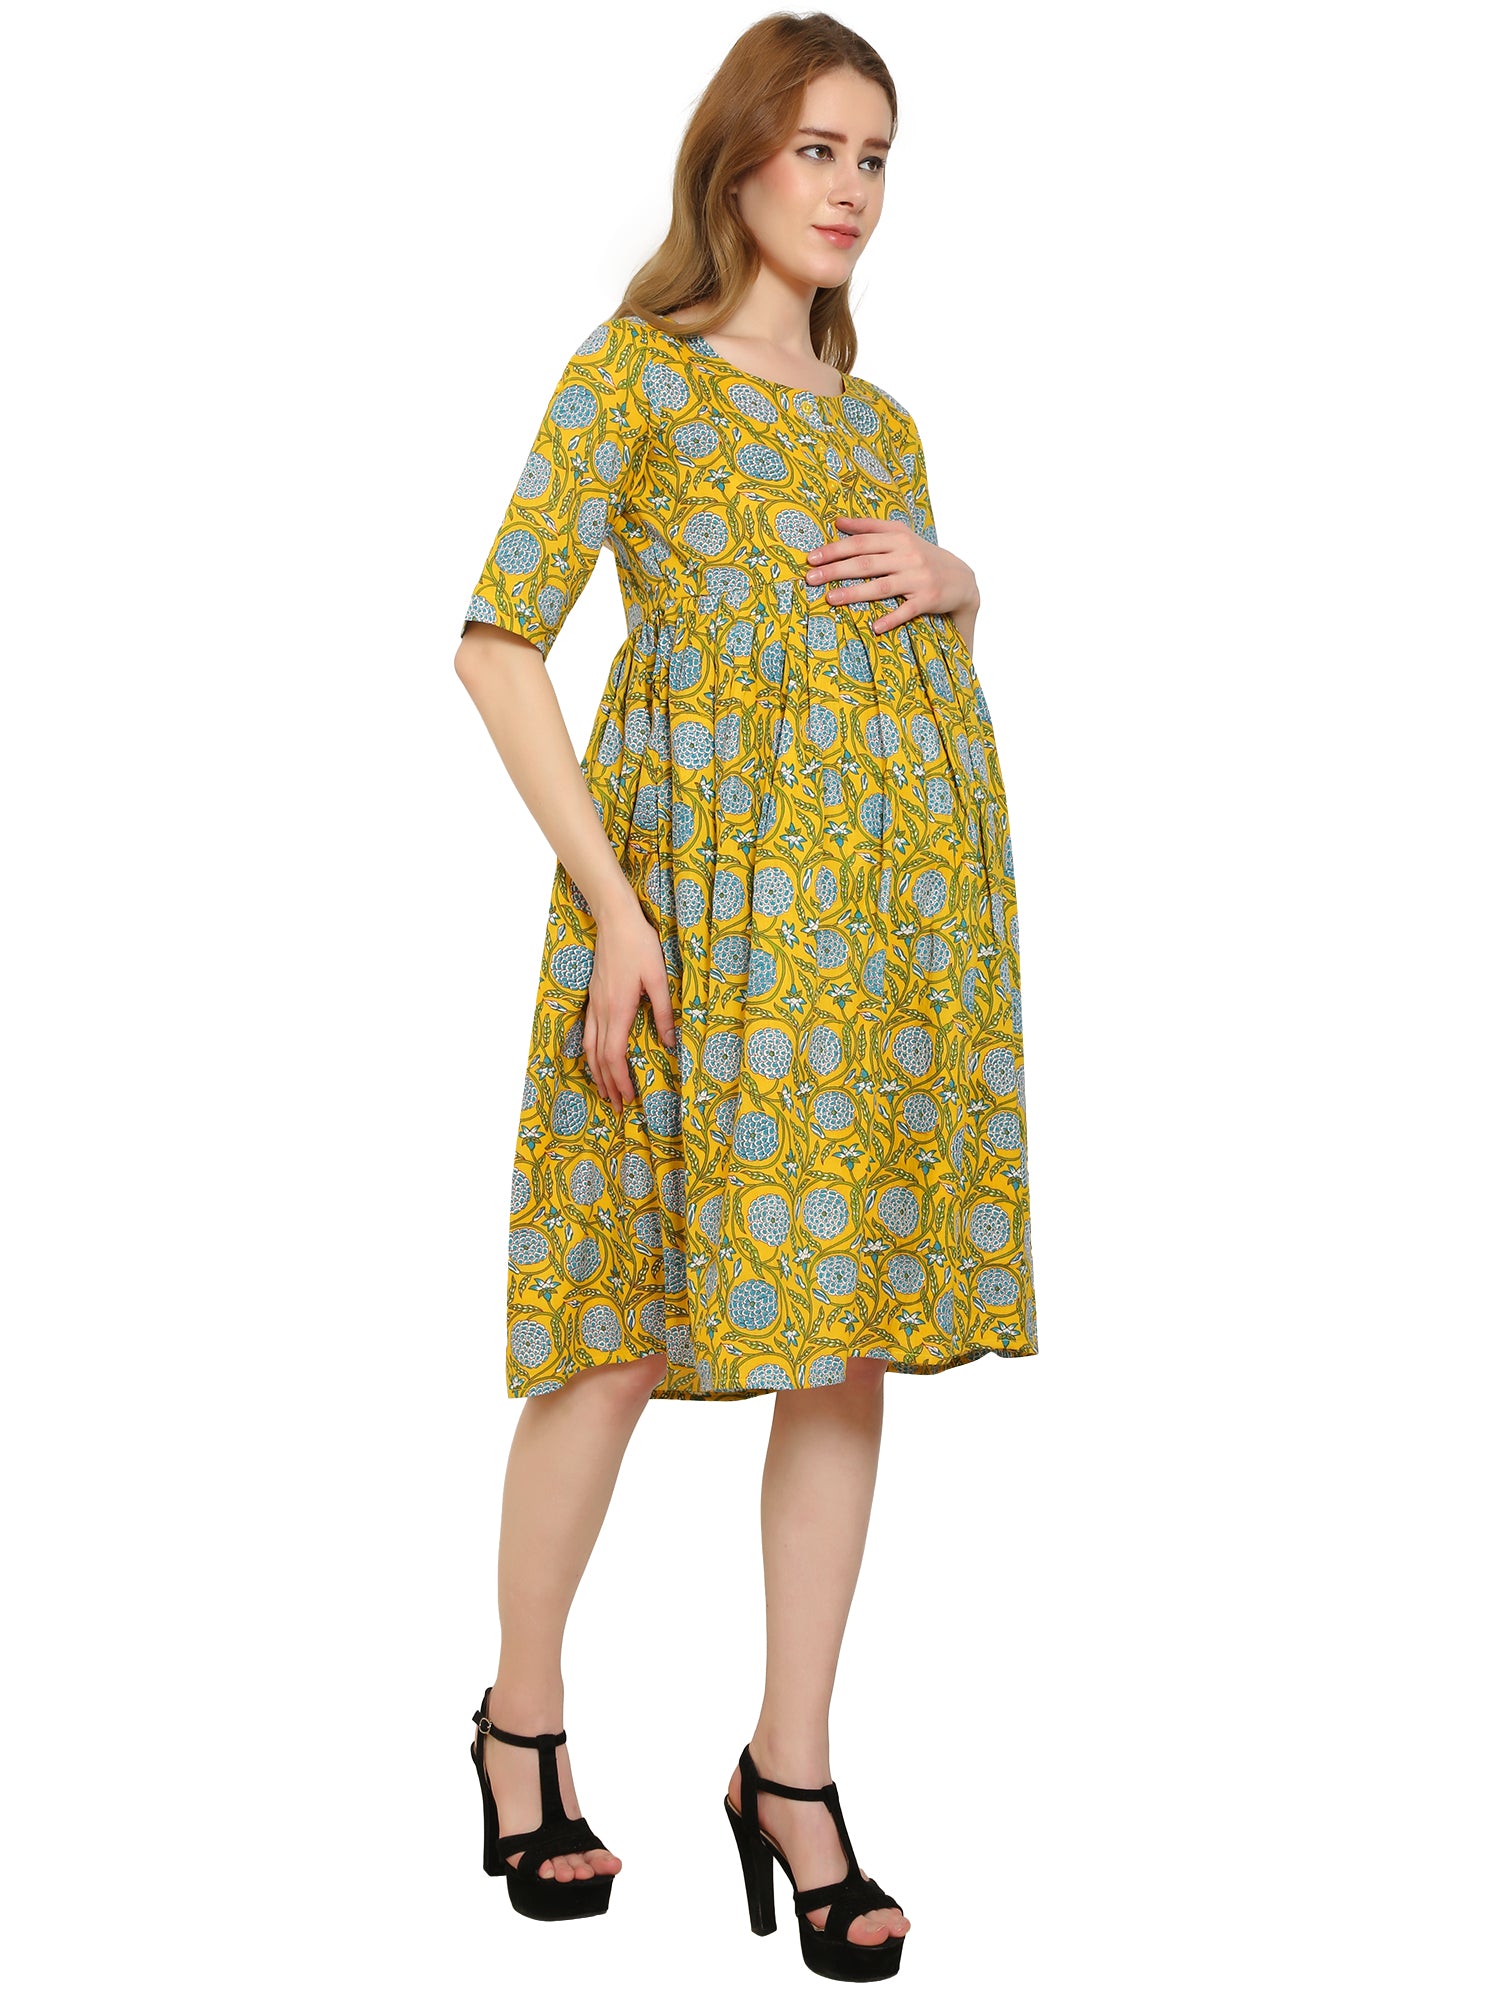 Yellow Fit and Flare Cotton Maternity and Feeding Dress